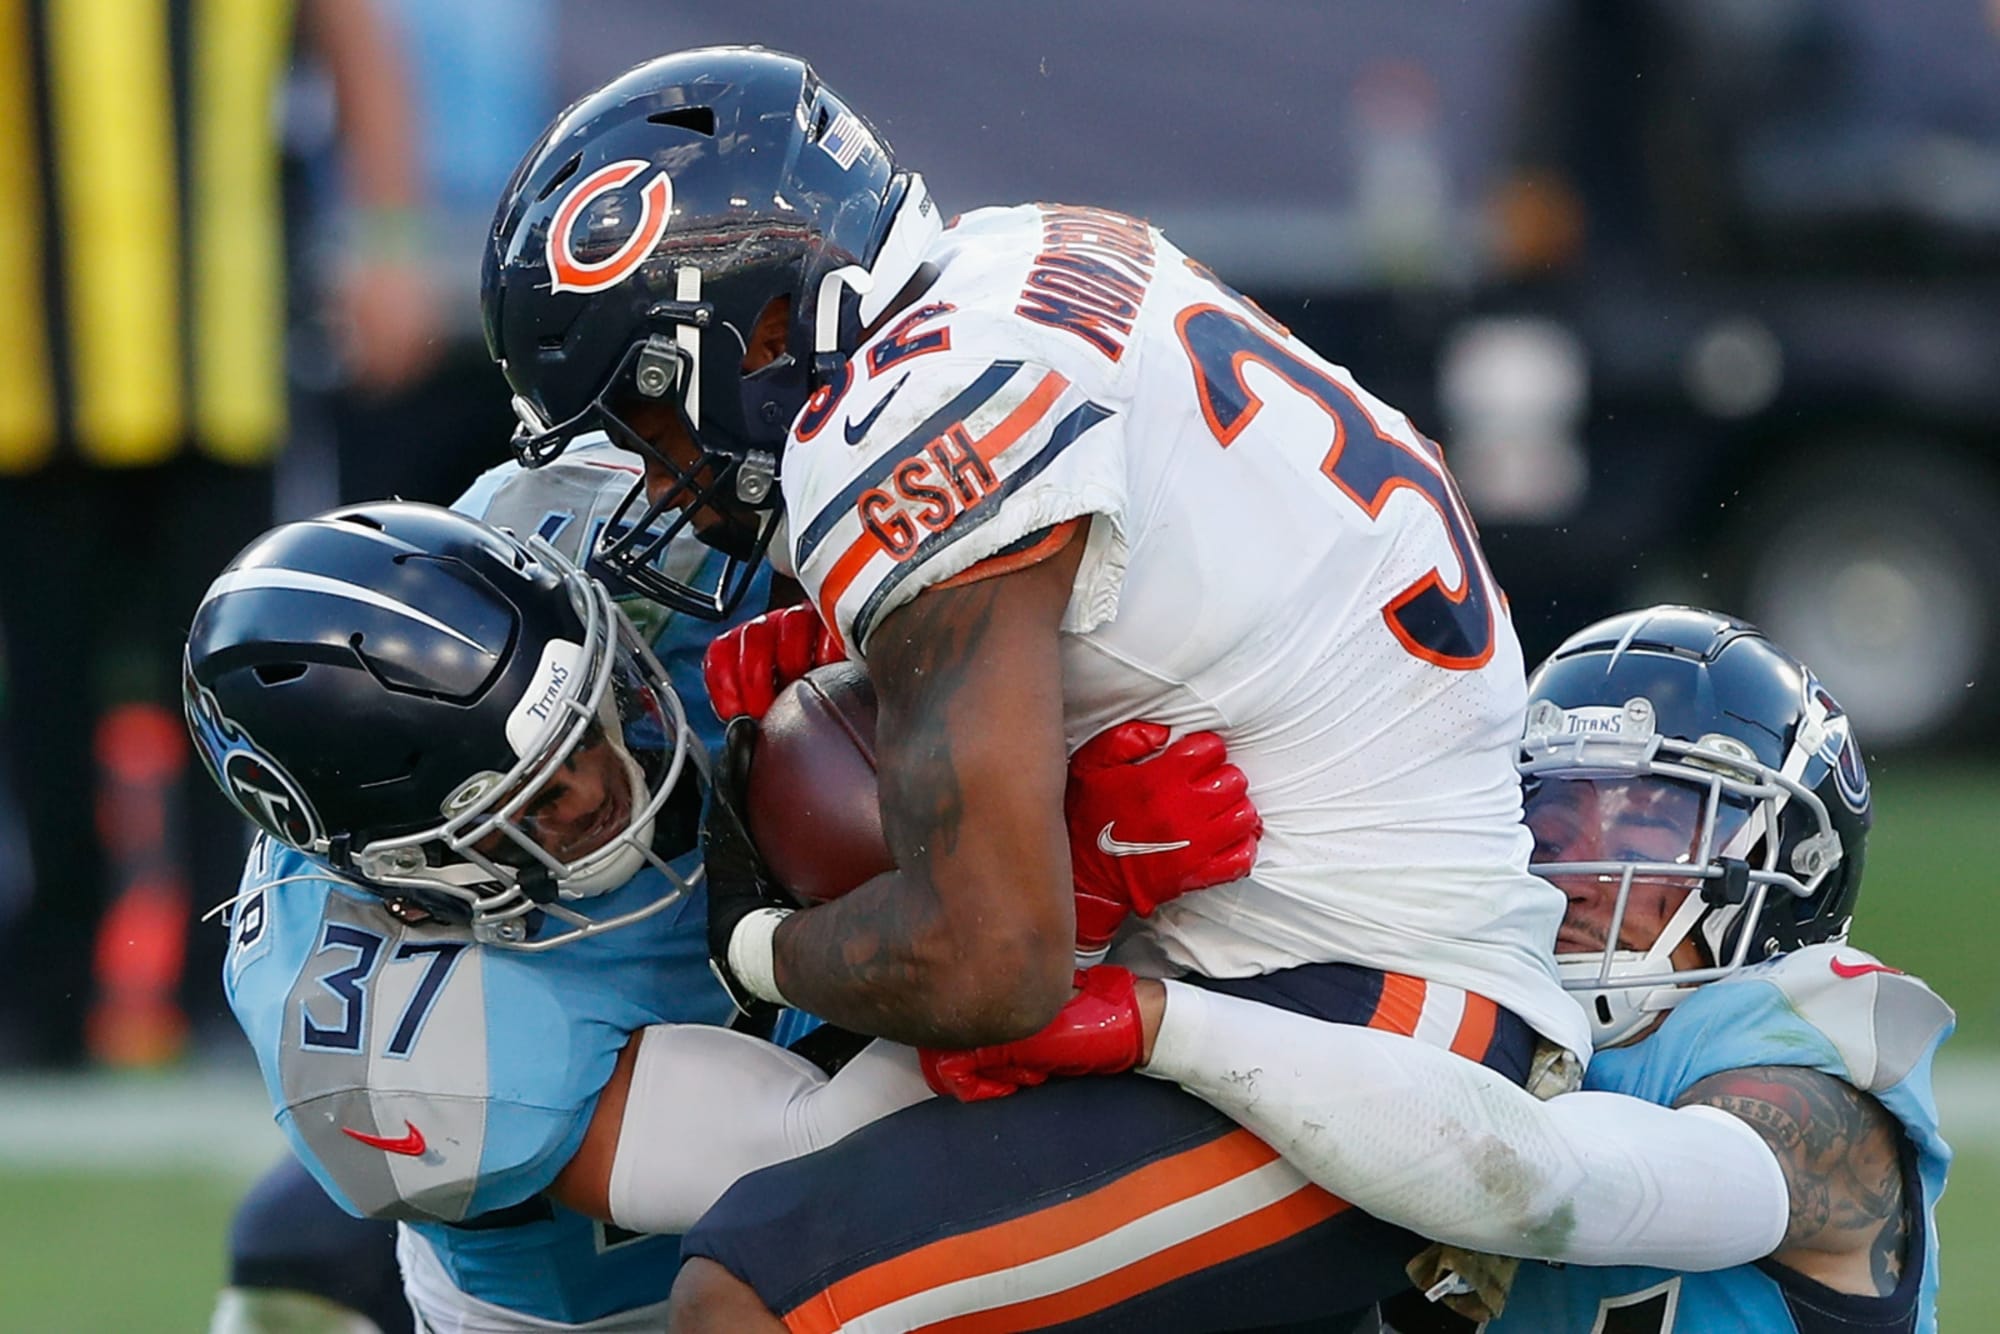 Chicago Bears: Final score makes things look way closer for offense